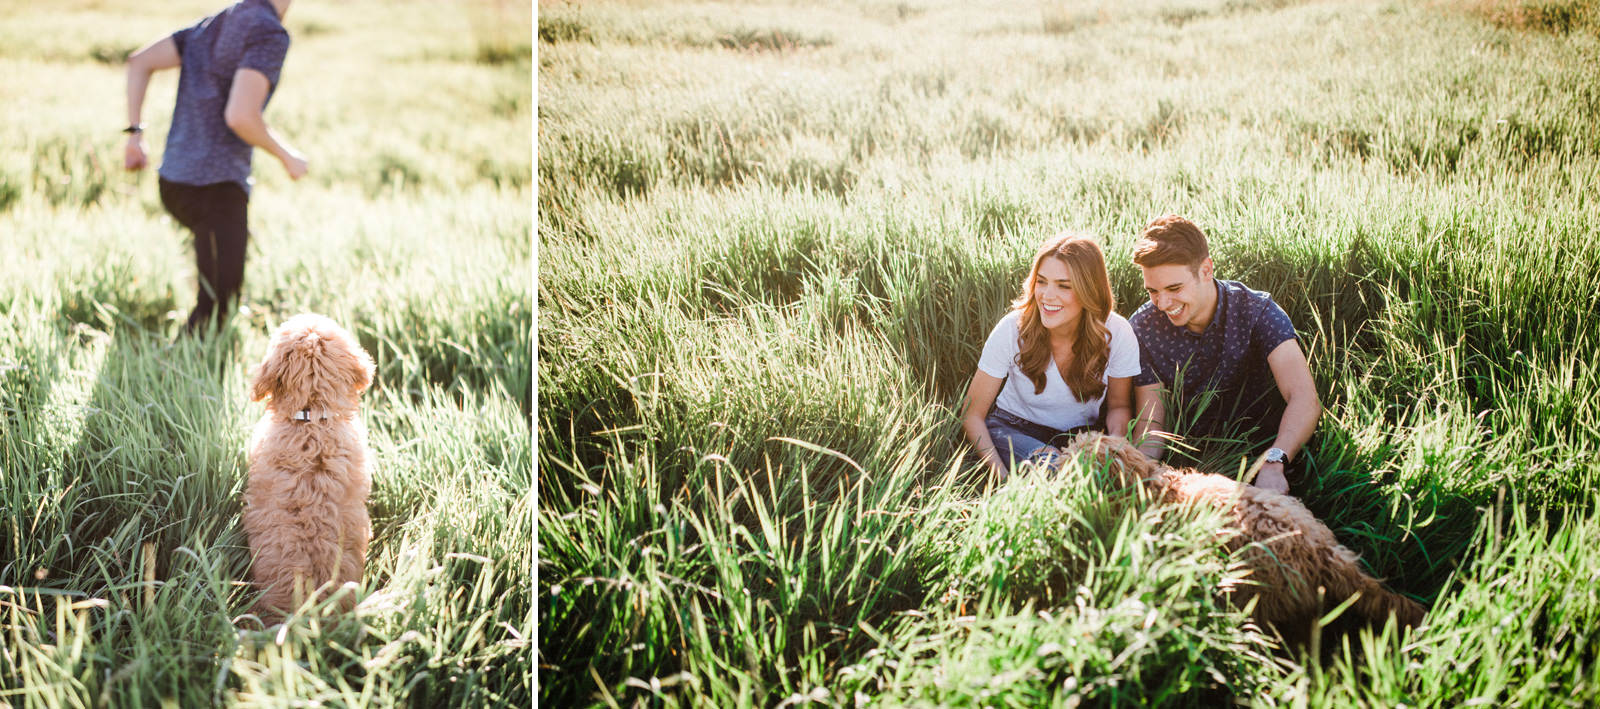 046-summery-engagement-session-with-a-goldendoodle-at-discovery-park-on-film.jpg